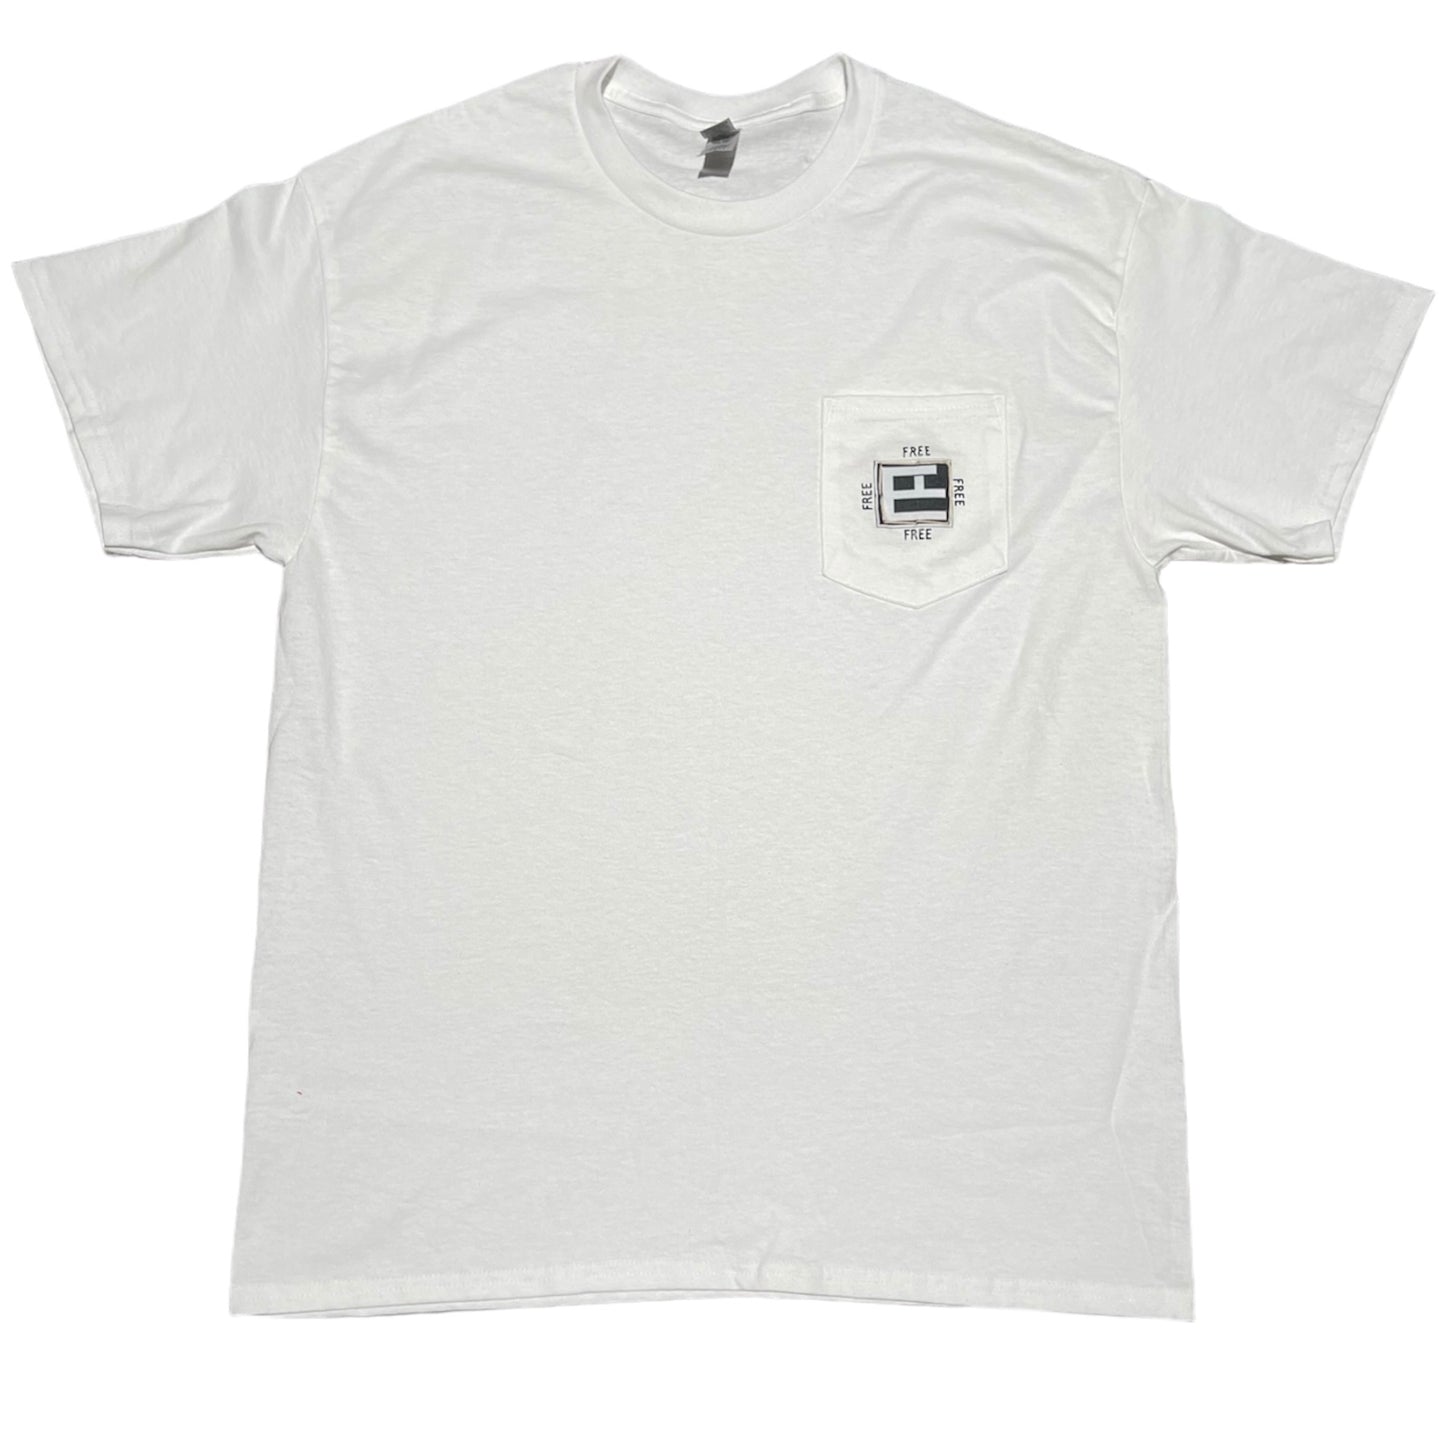 Free Tee by The Free Creatives